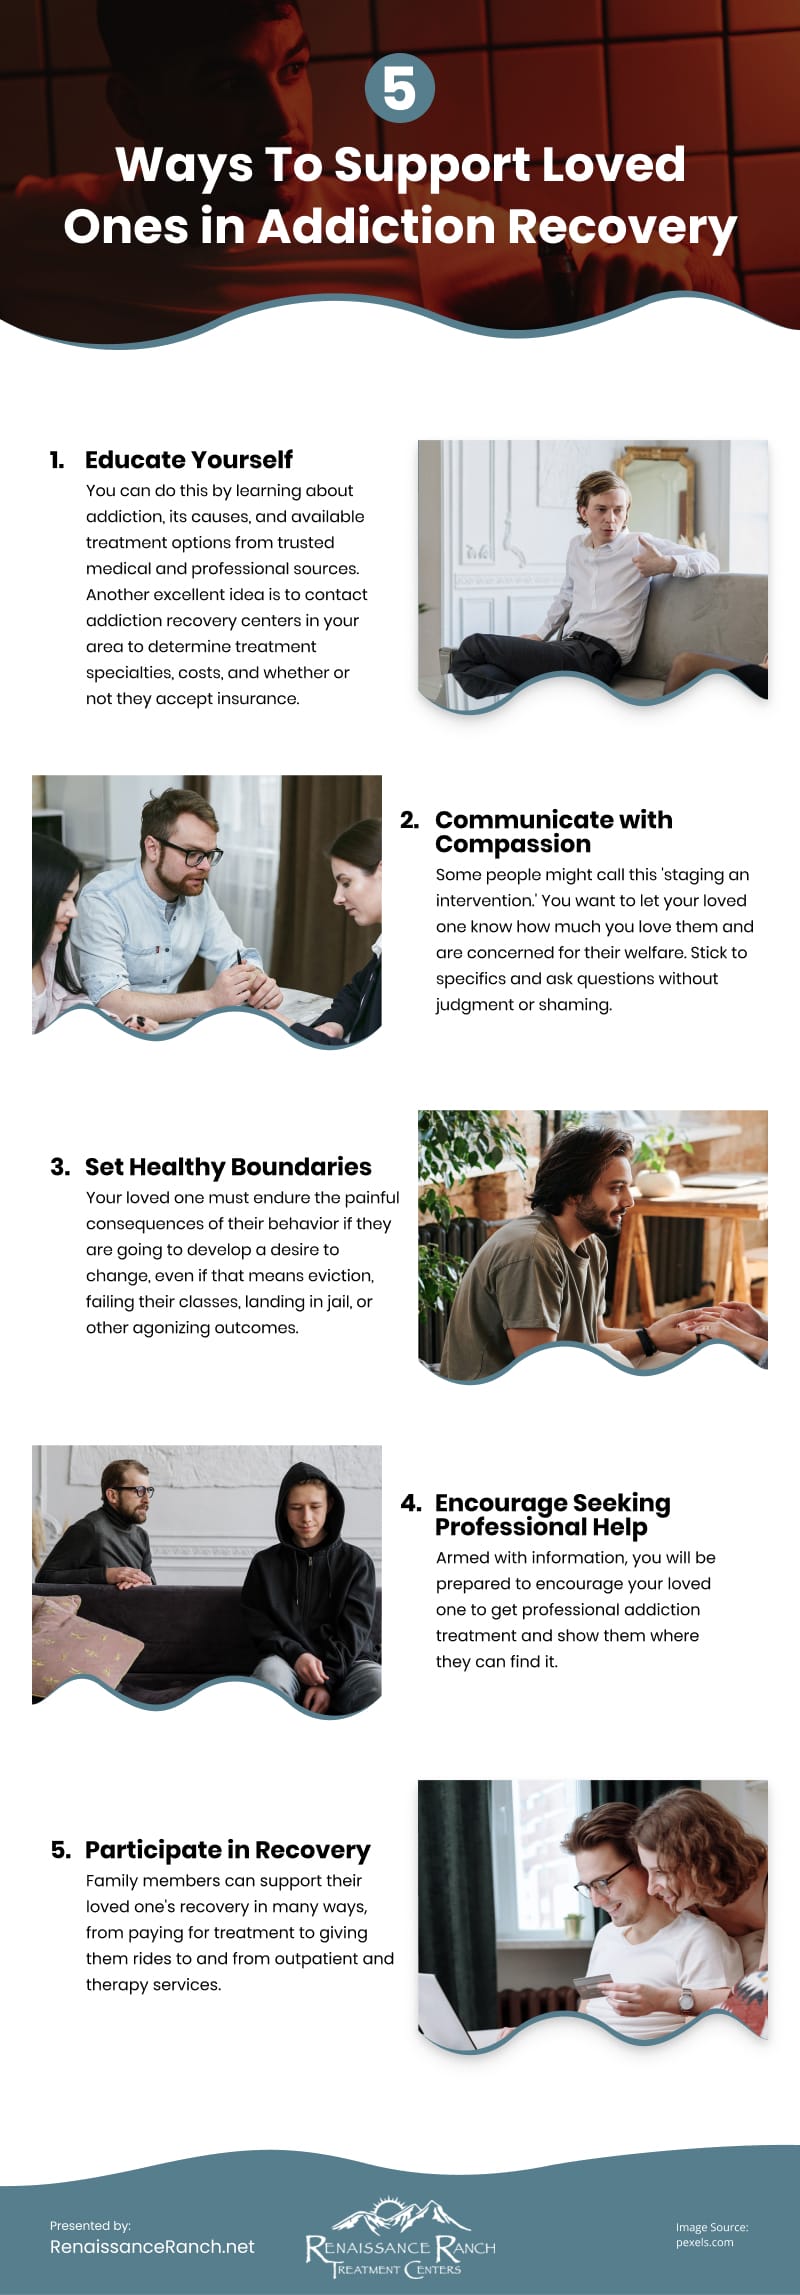 5 Ways To Support Loved Ones in Addiction Recovery Infographic